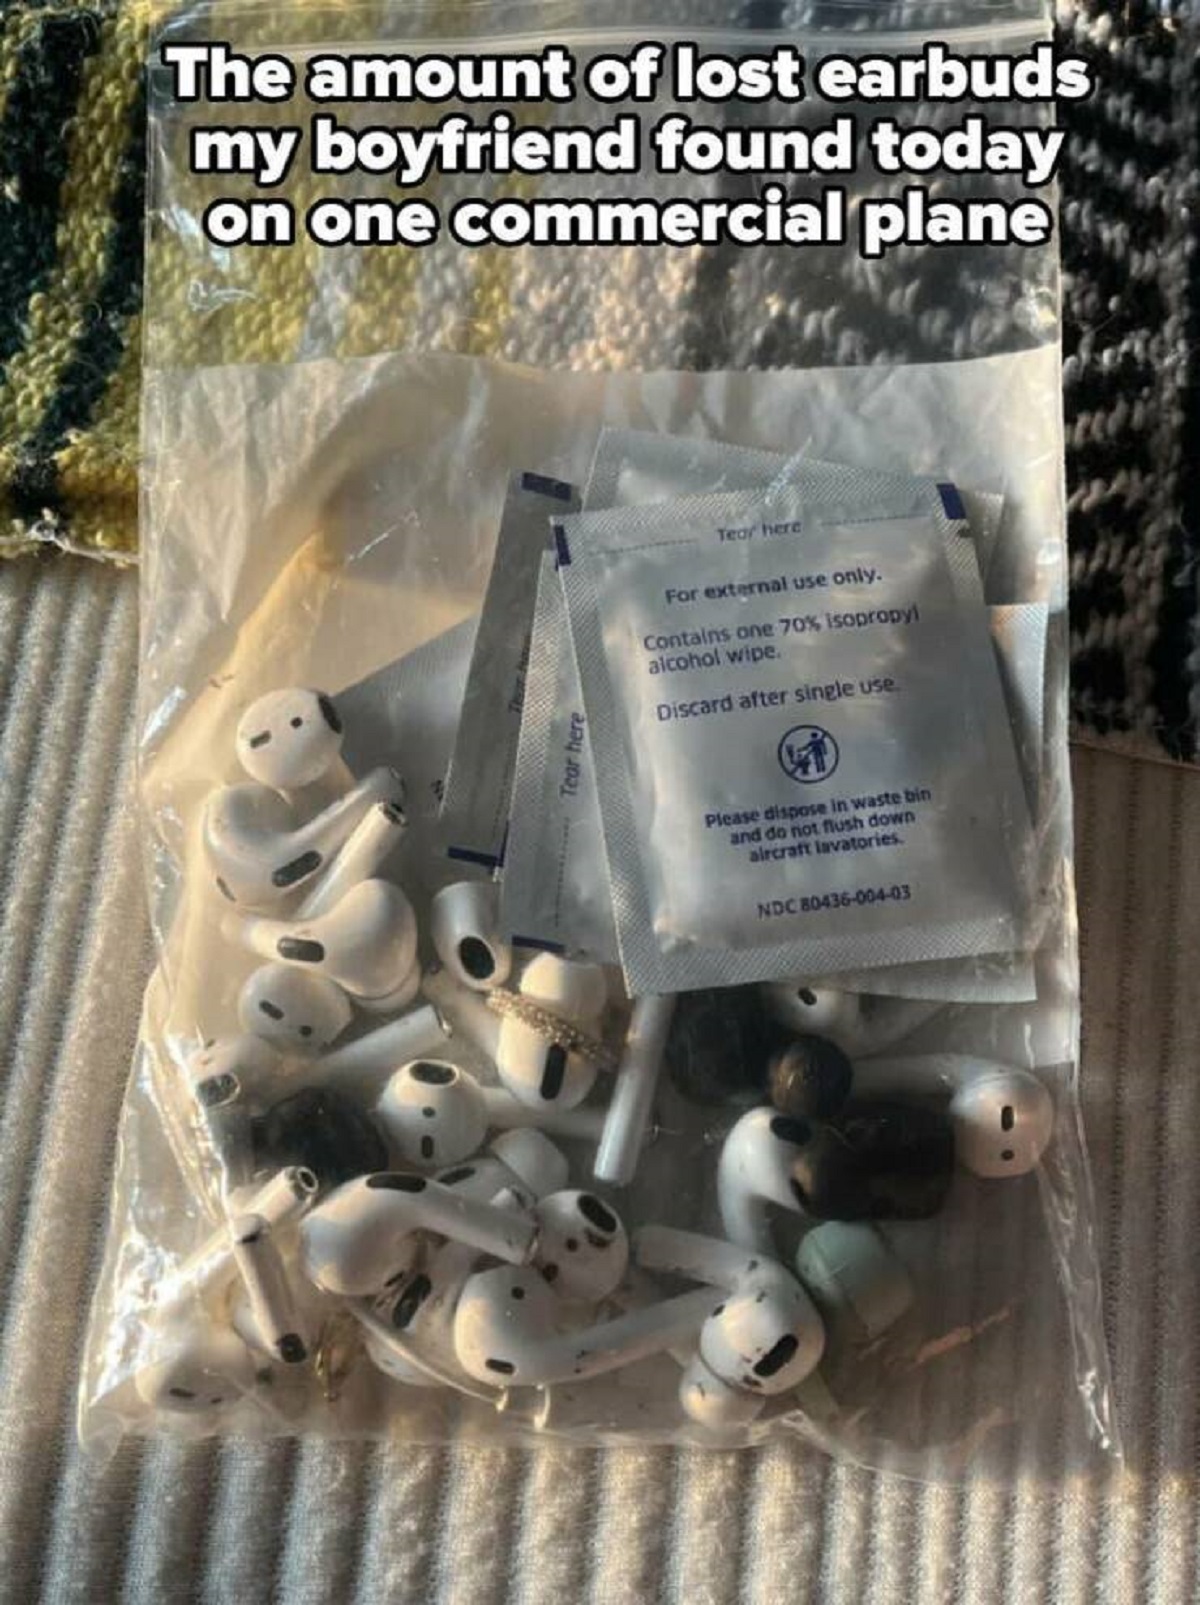 Waste - The amount of lost earbuds my boyfriend found today on one commercial plane Contains 70% impro cohol wipe Dcard after single une NOCM43620423